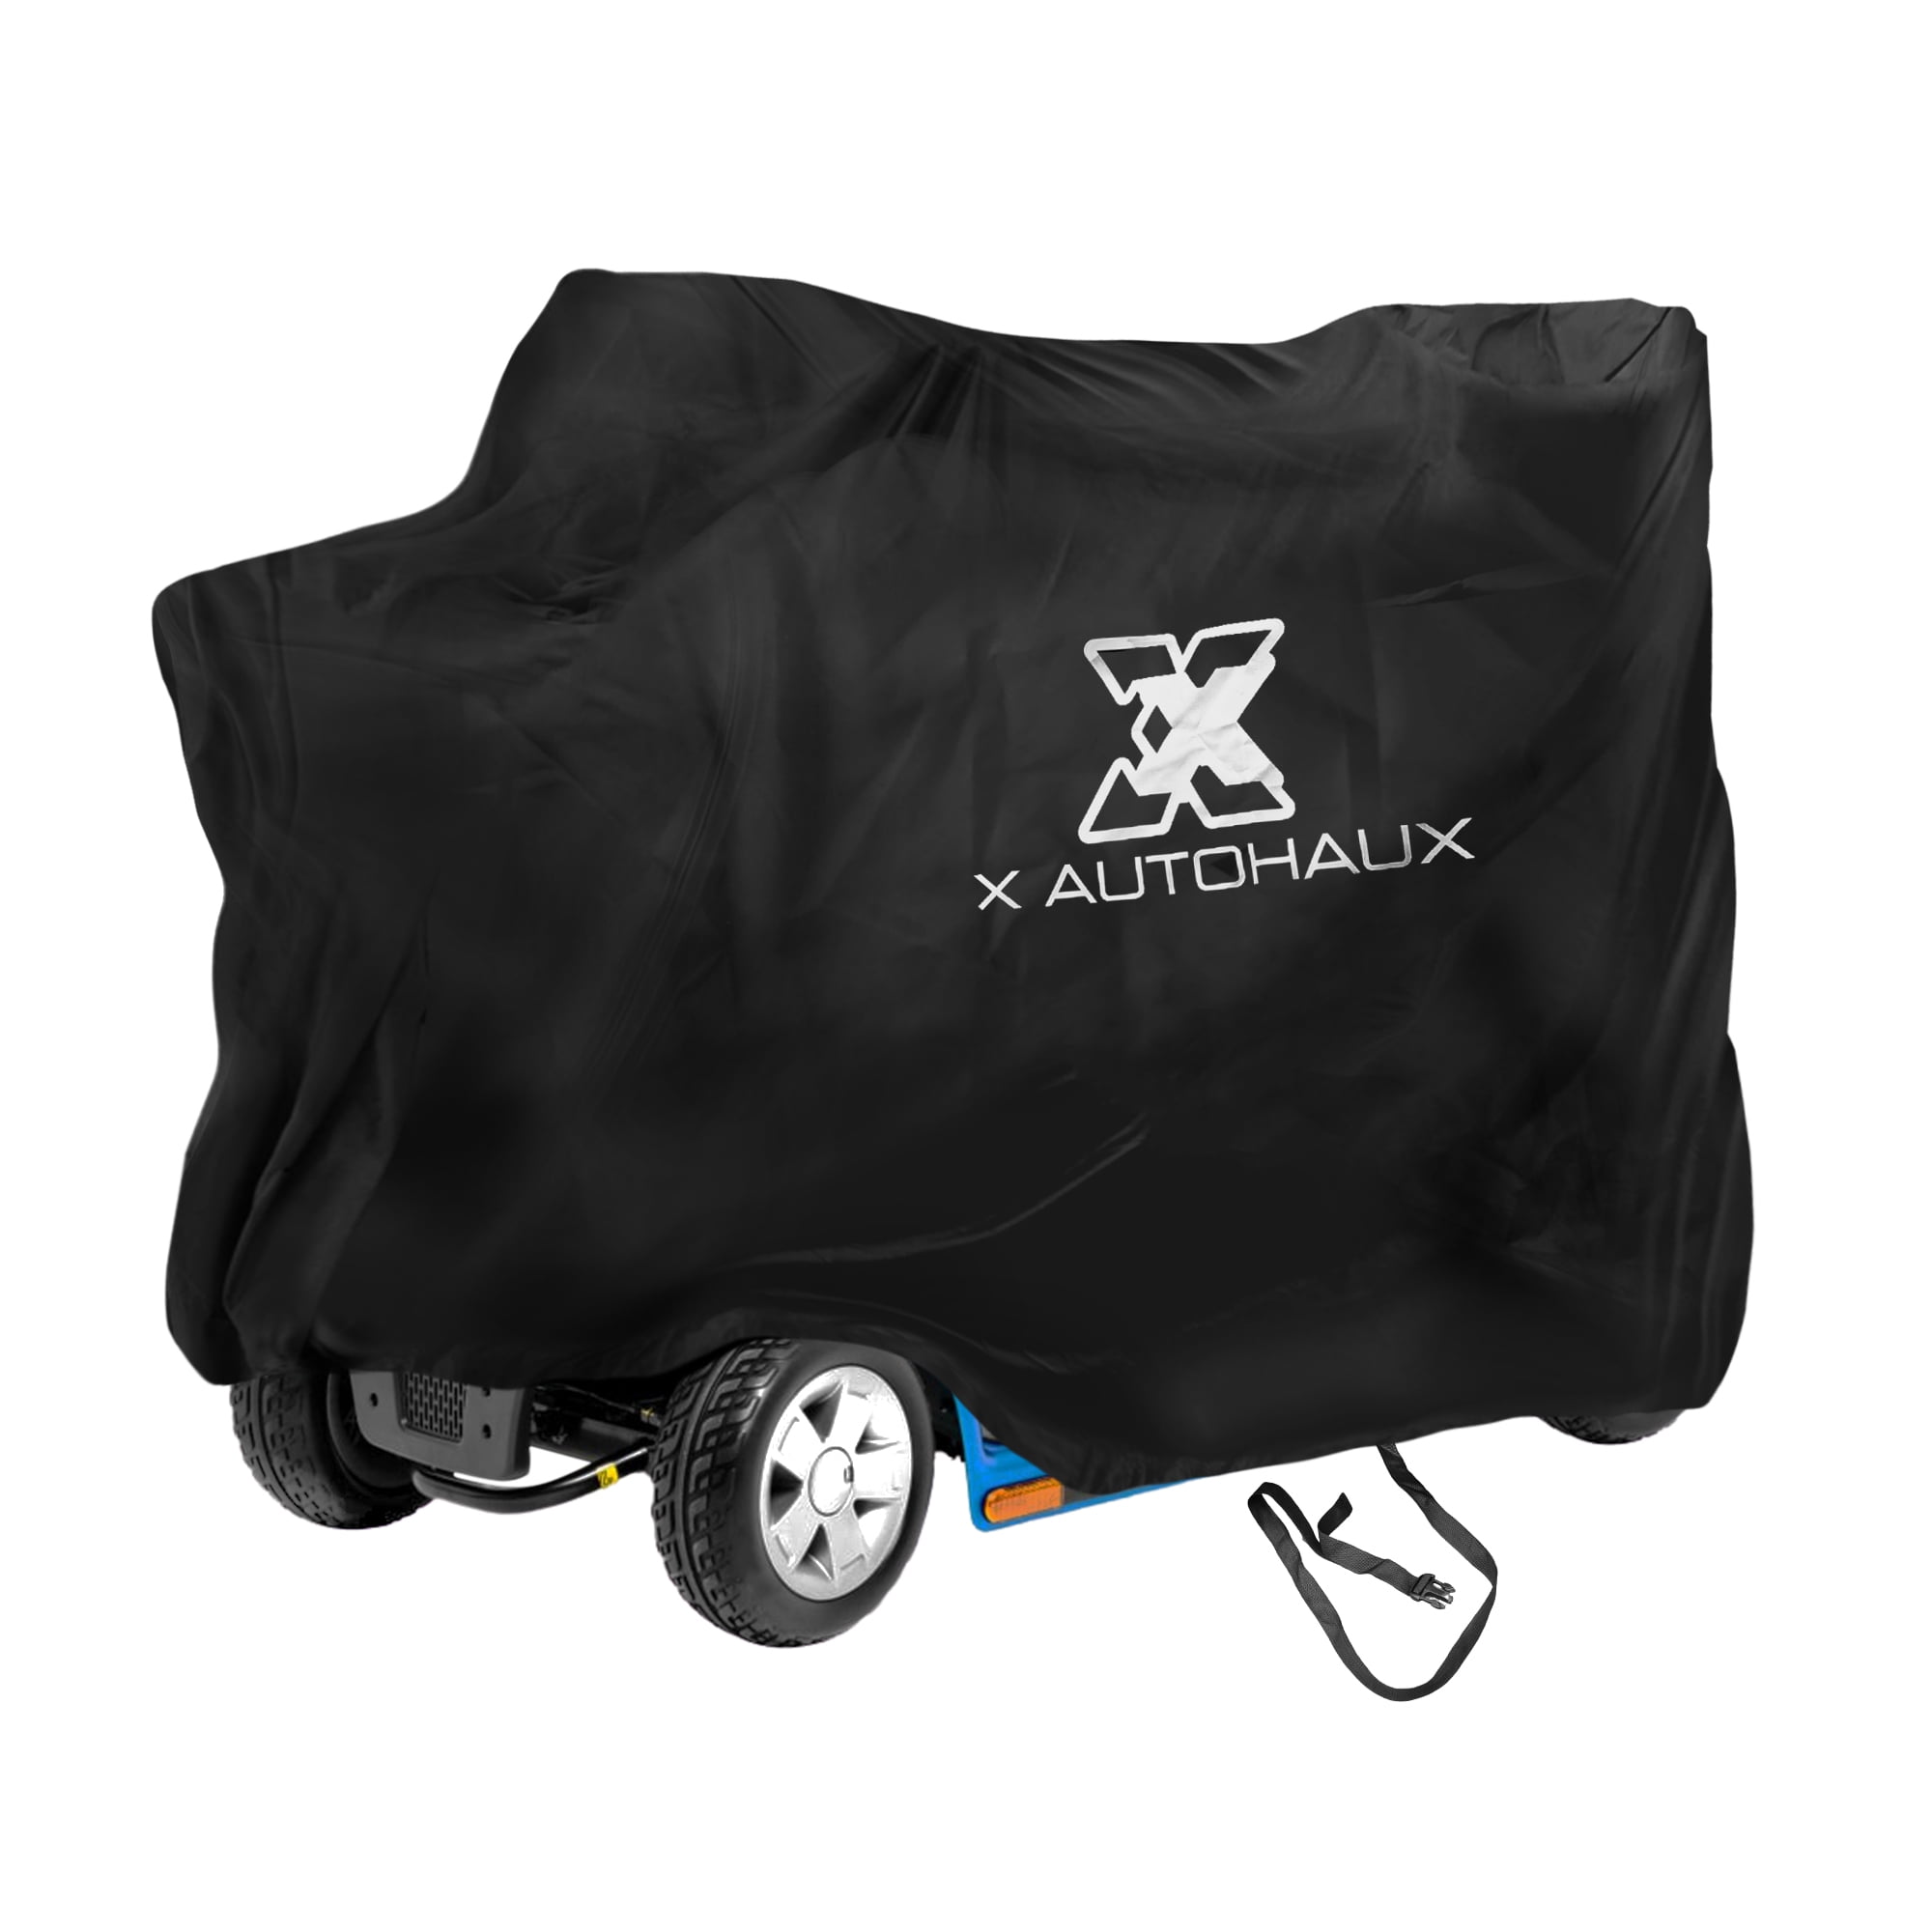 55"x26"x36" Motorcycle Mobility Cover Waterproof Rain Protection 190T Polyester Walmart.com